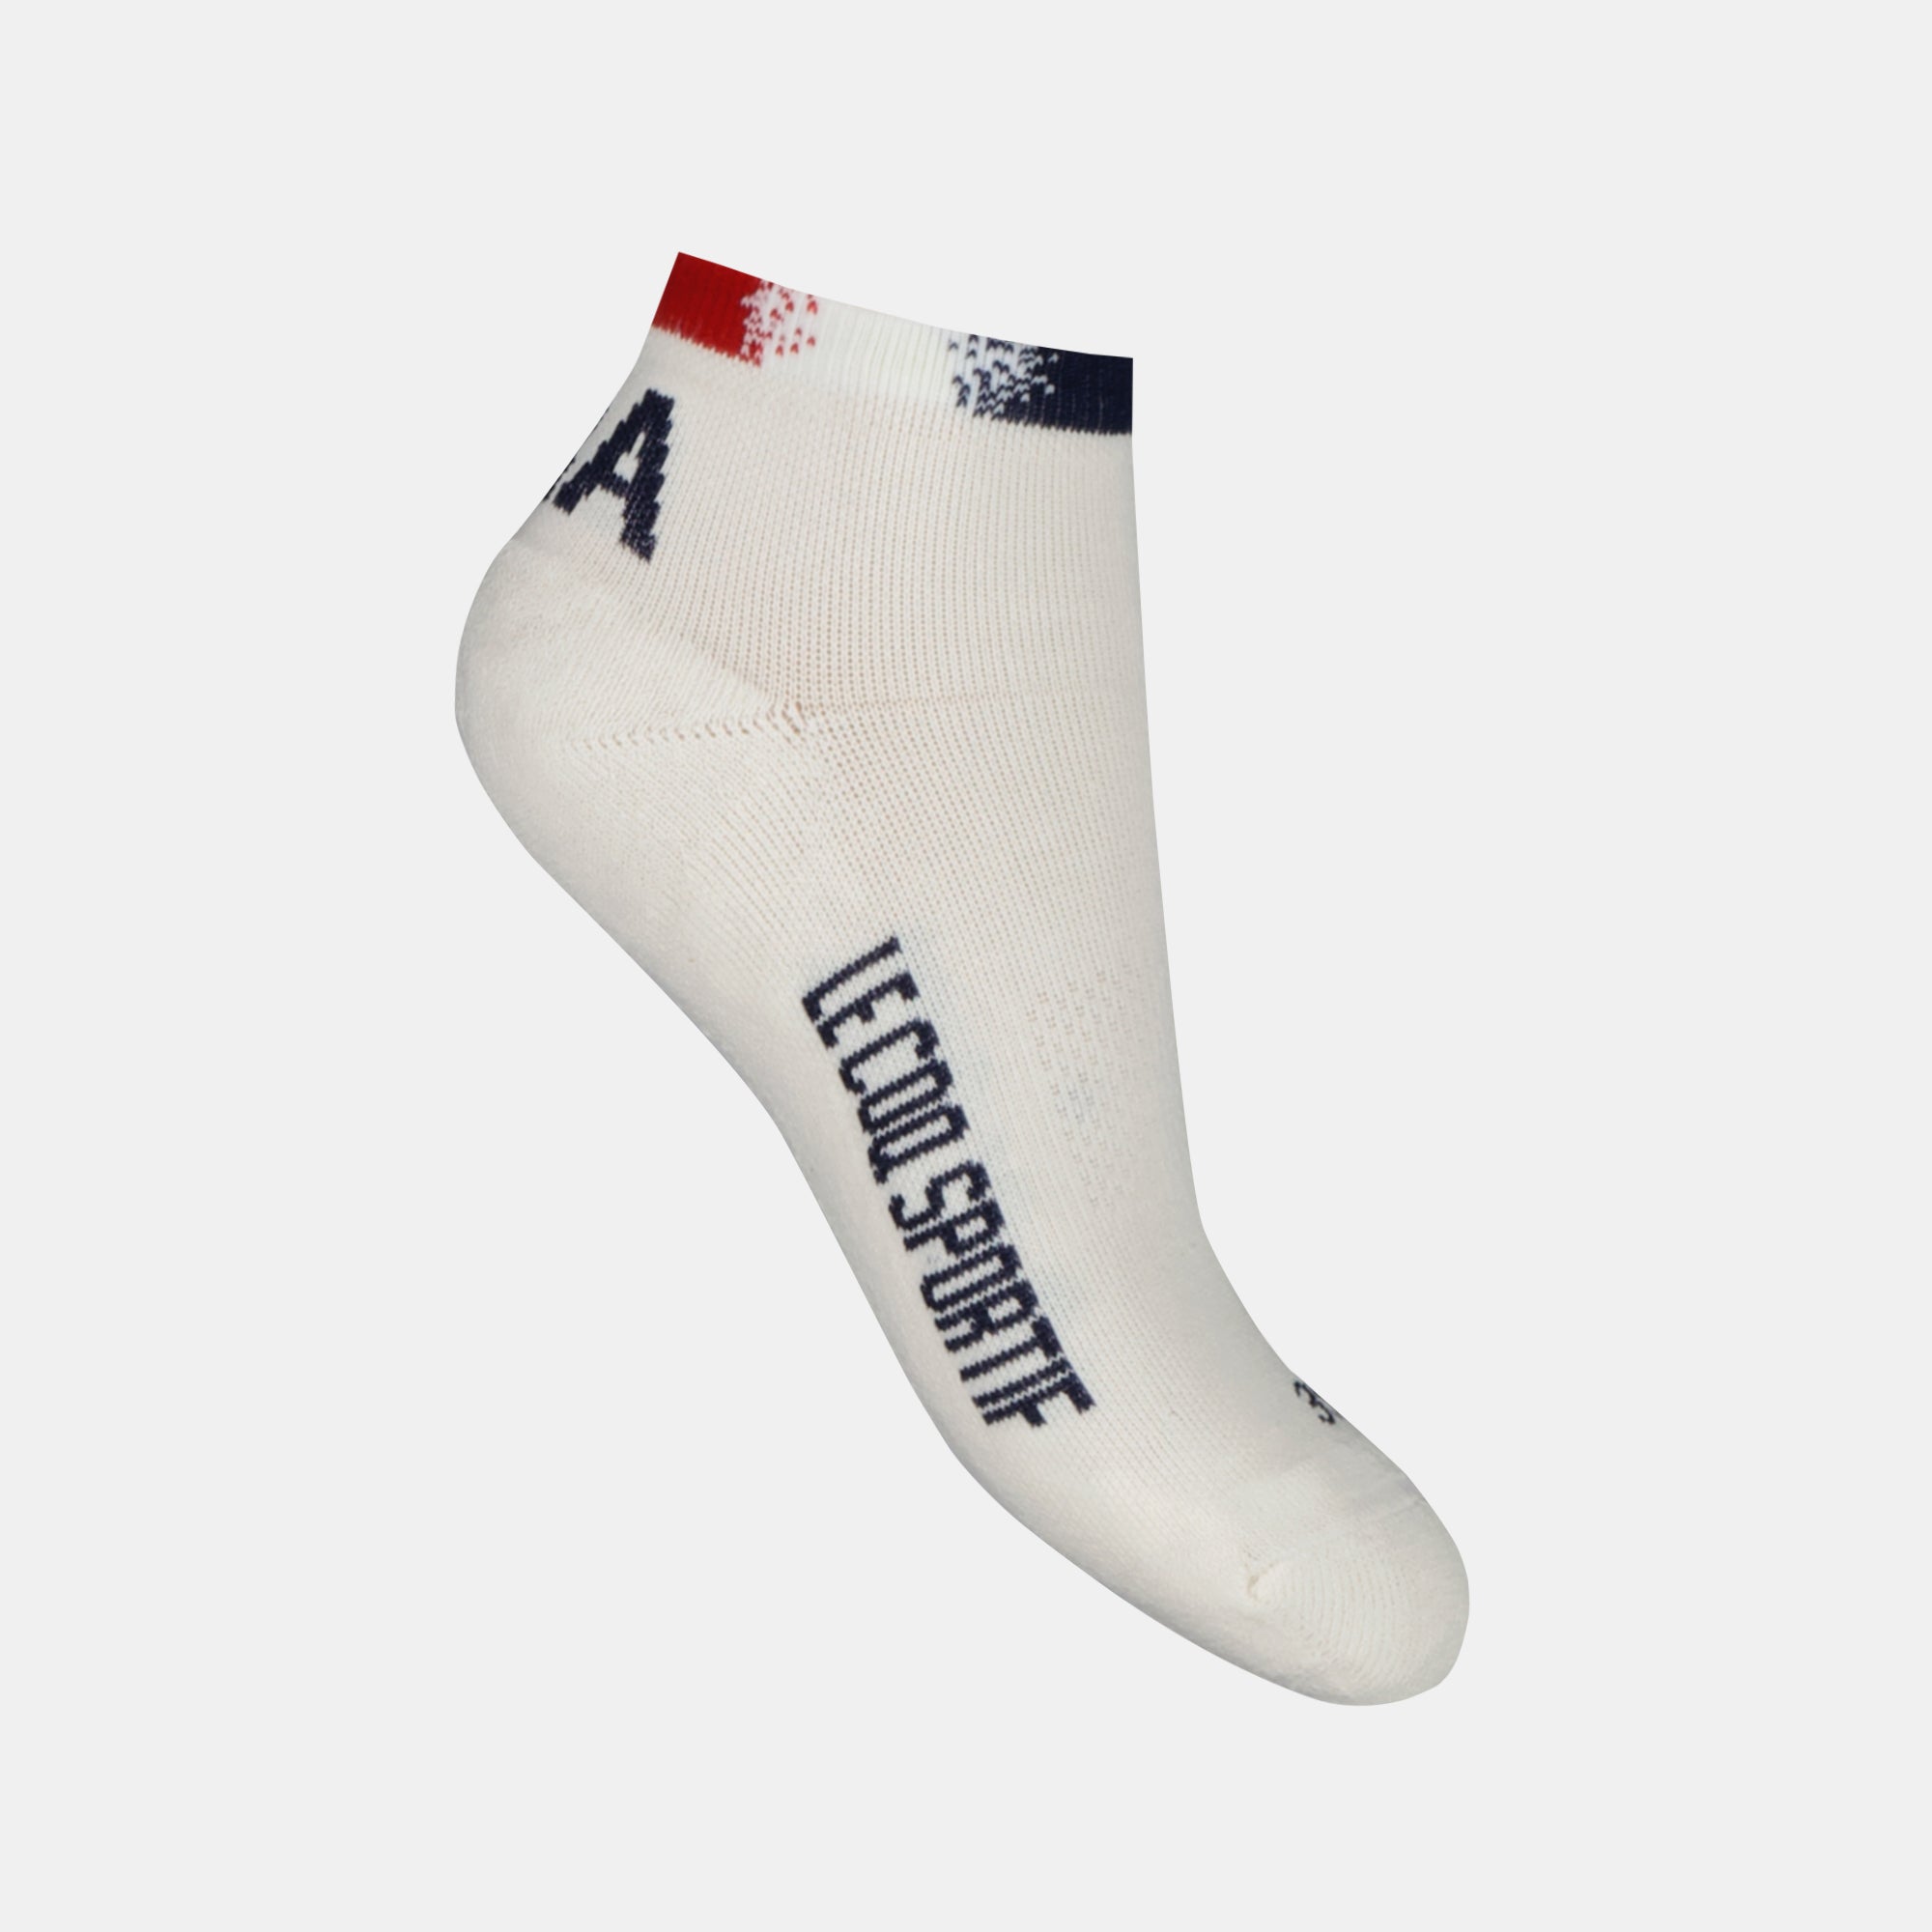 2421228-EFRO 24 Chaussettes Basses N°1 marshmall | Chaussettes Unisexe